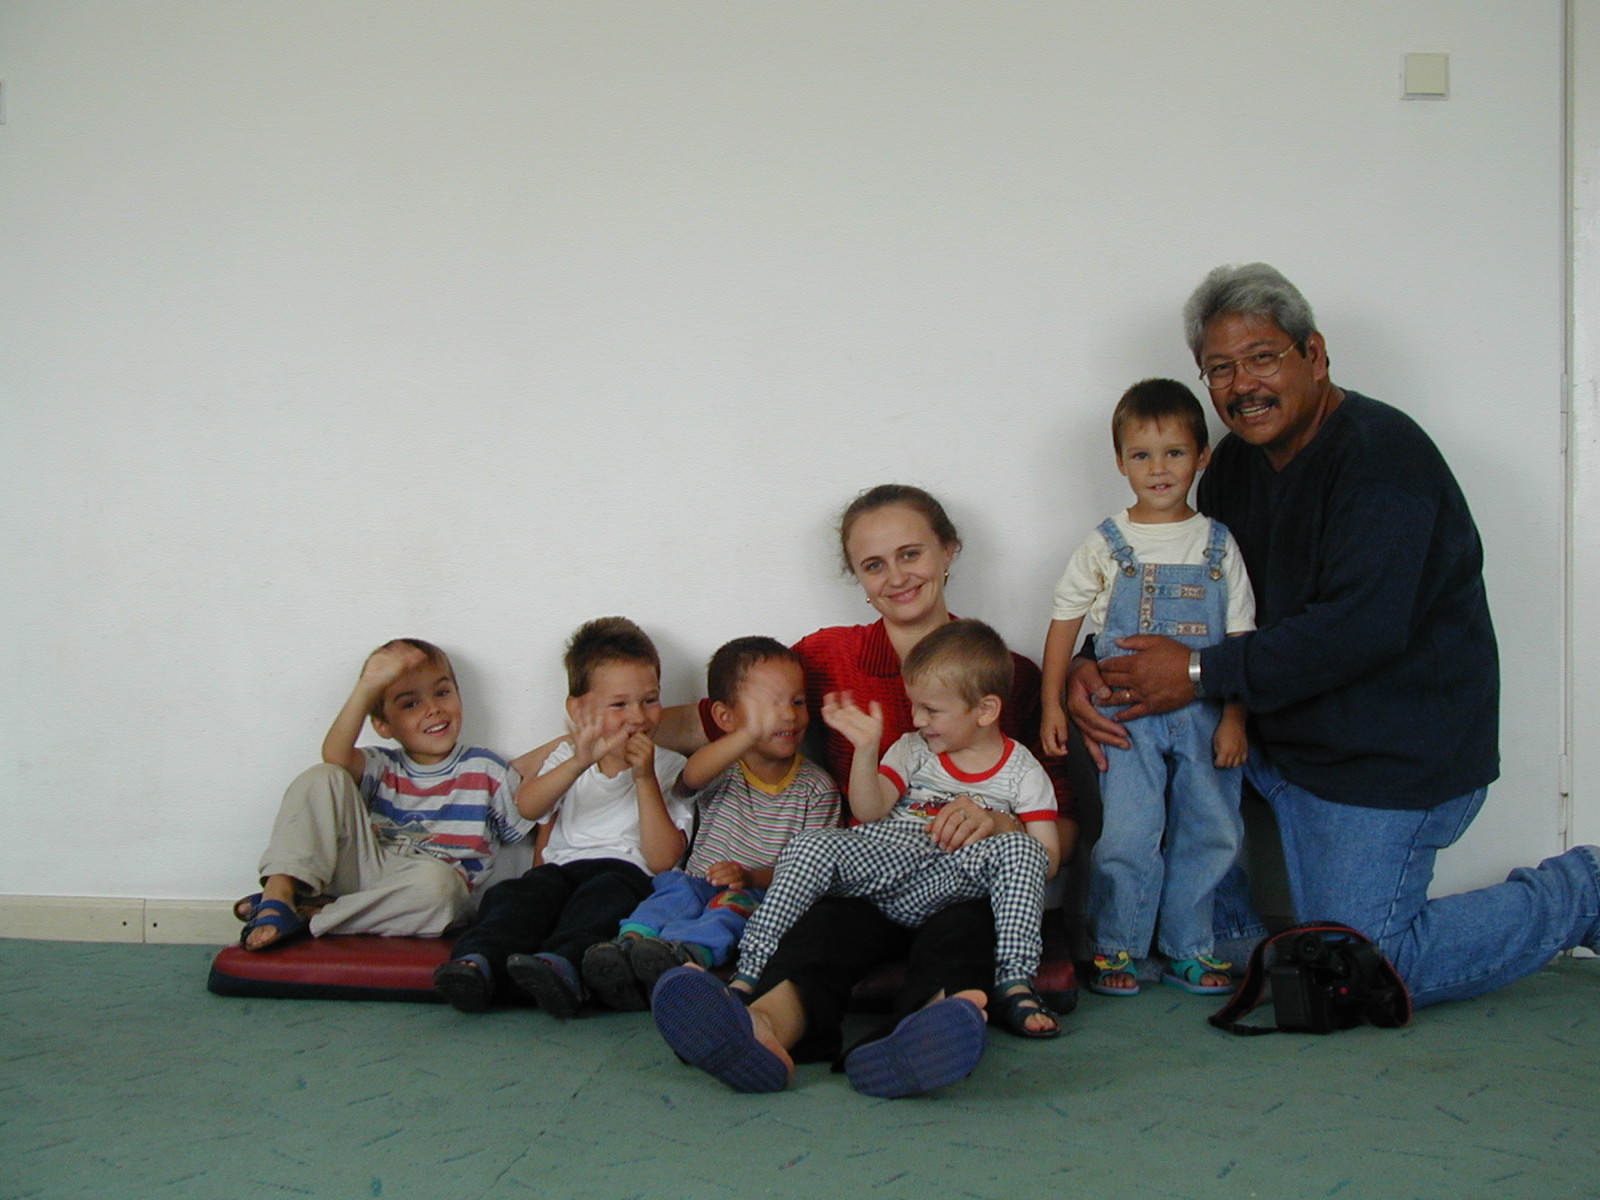 Frank Mendiola with children in the play room at Bistritia.